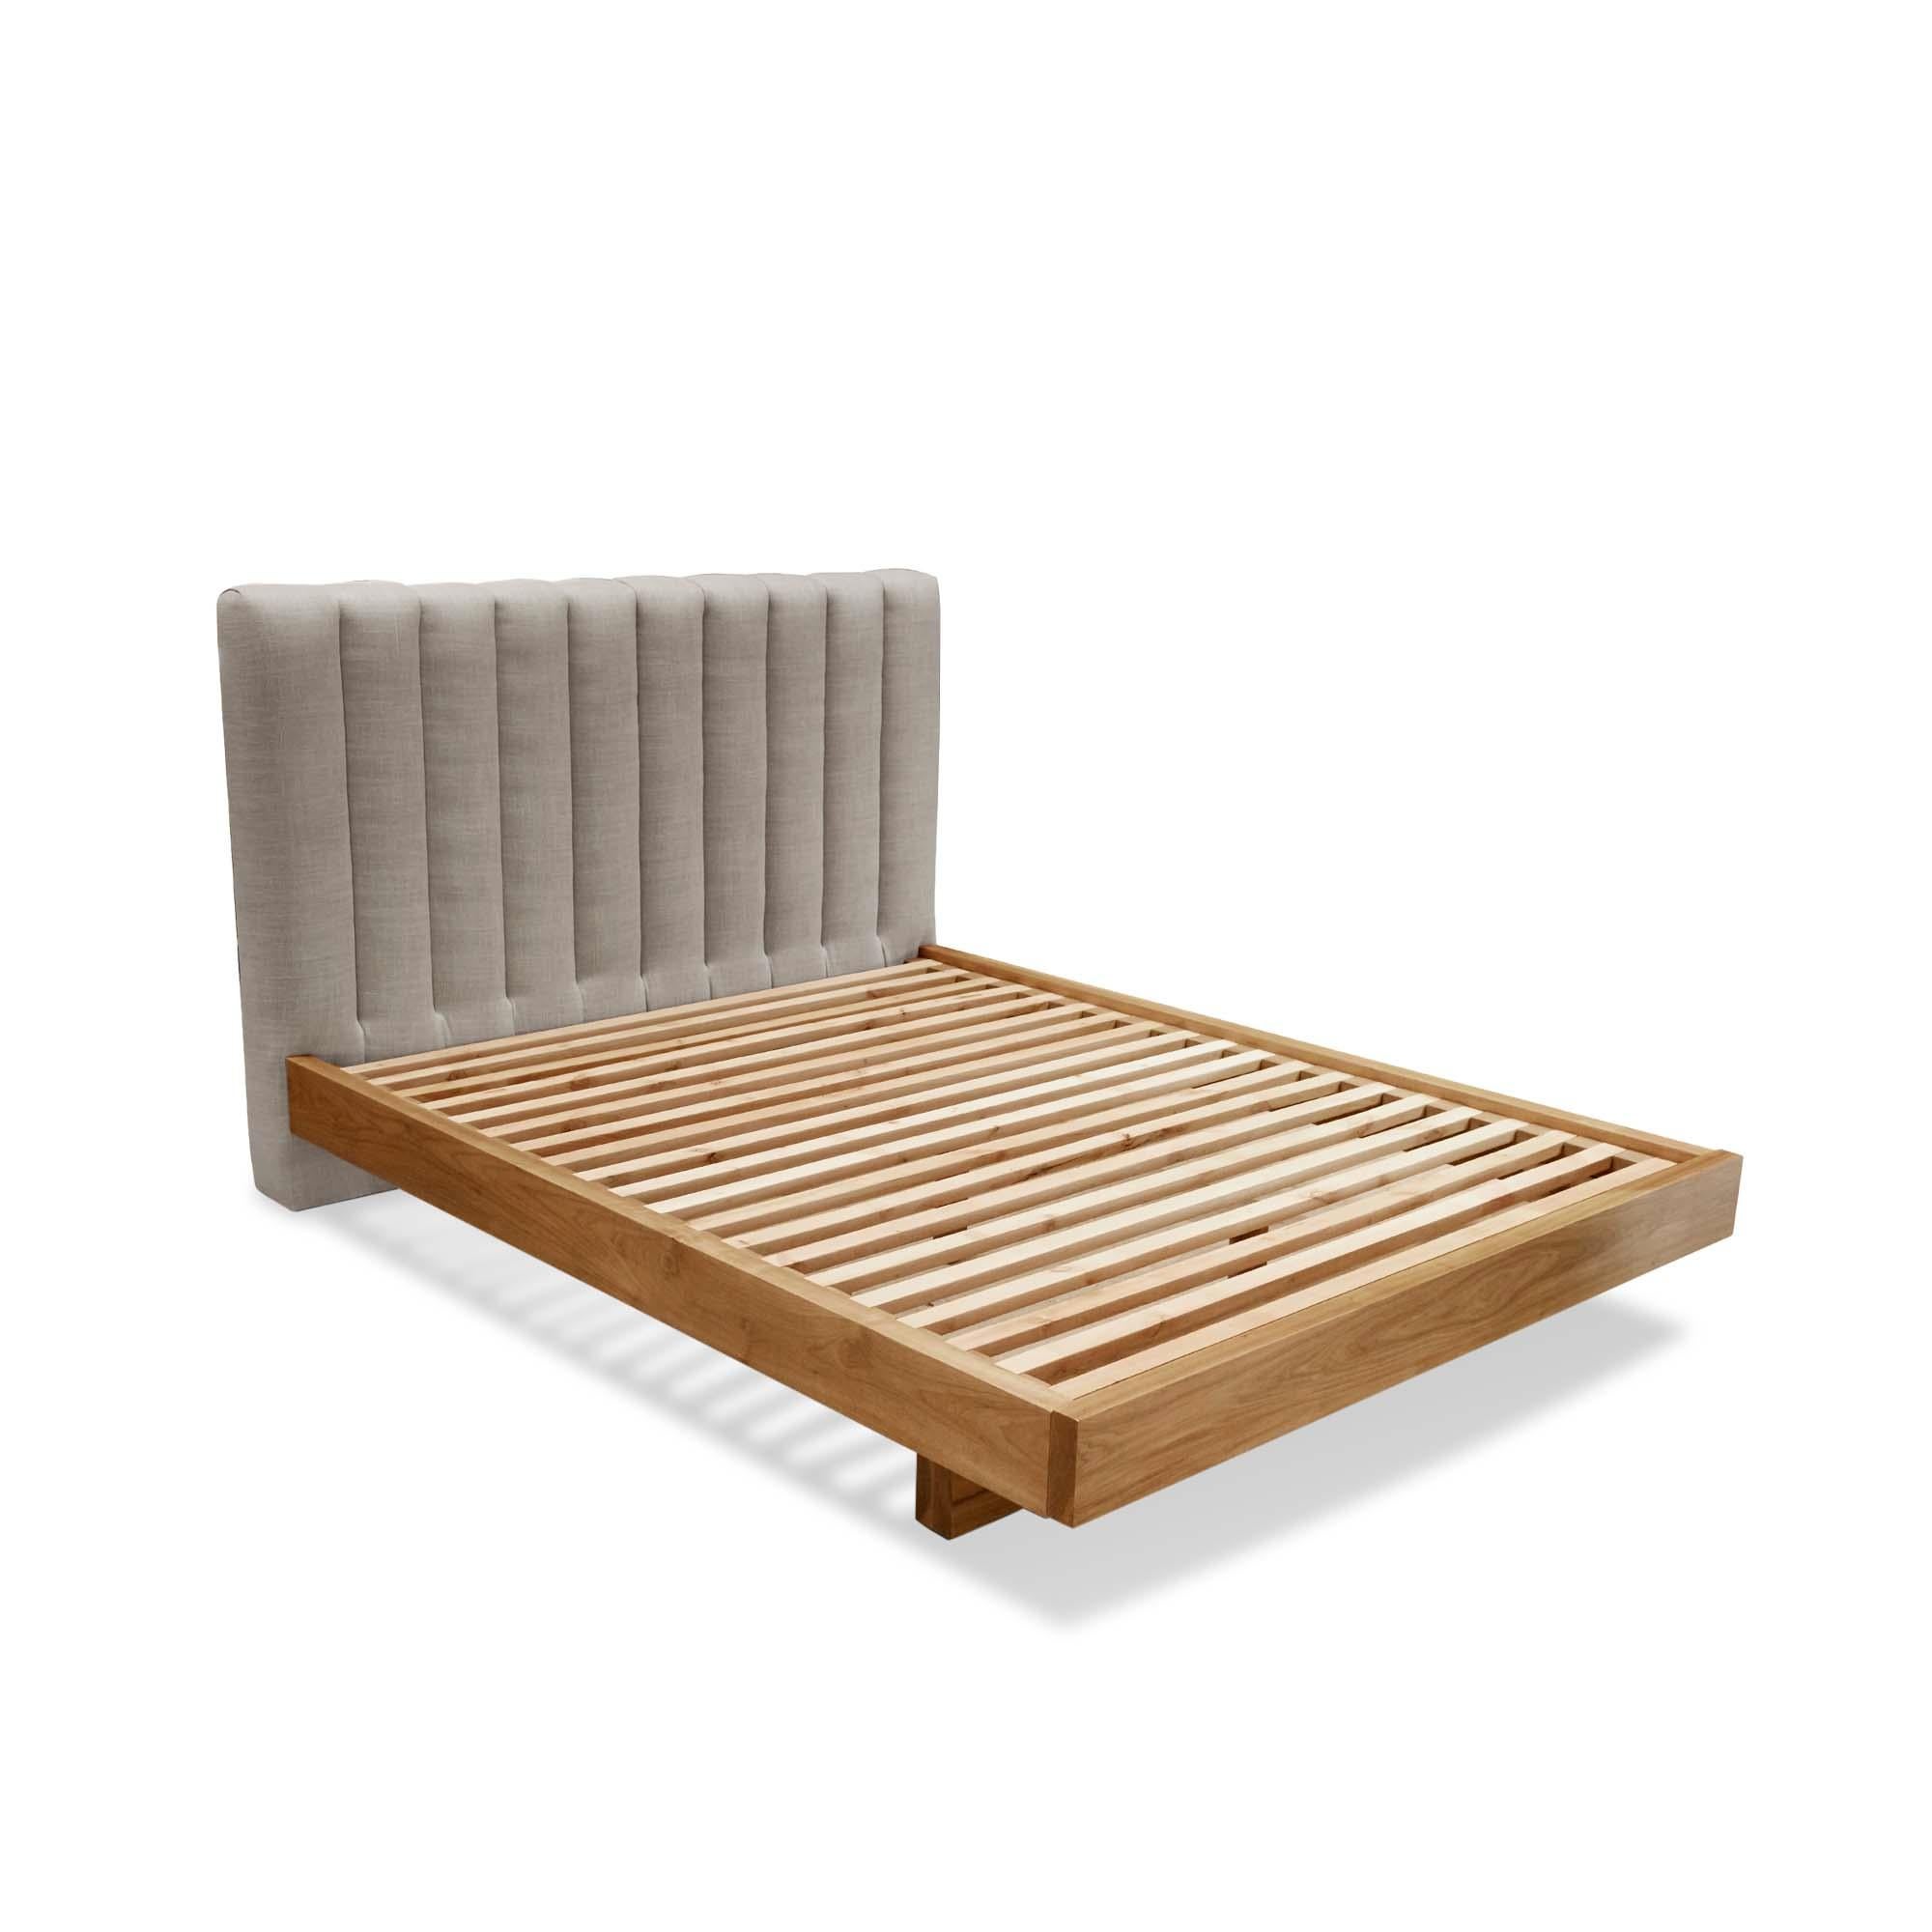 The Capitan bed features a channel tufted headboard and a minimal, Japanese-inspired wood platform. Available in American walnut or white oak. Shown here in linen and natural walnut. Queen size.

The Lawson-Fenning Collection is designed and